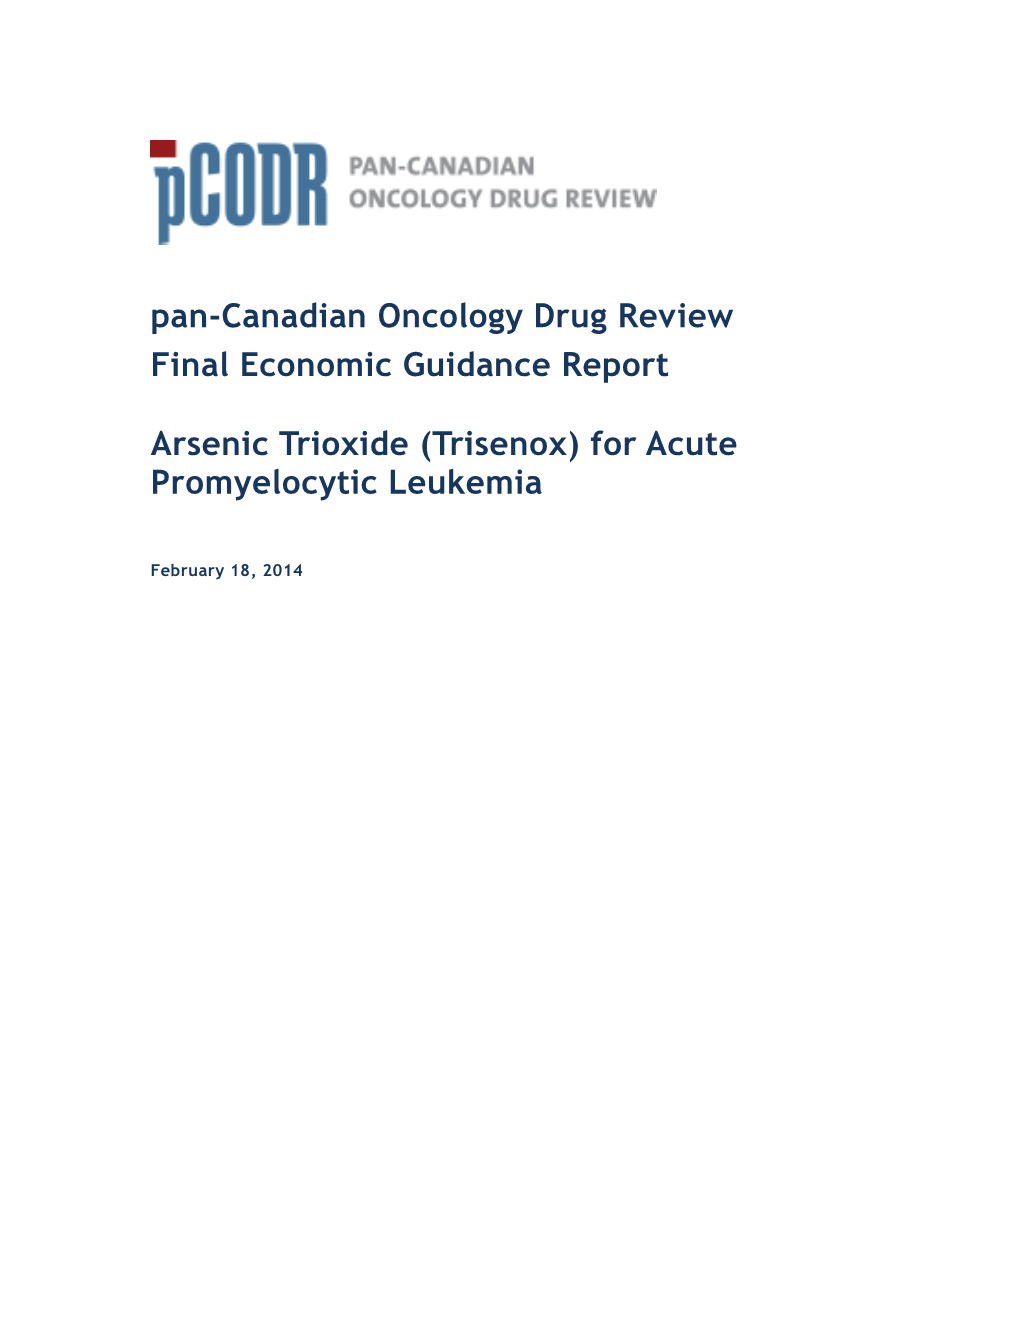 Pan-Canadian Oncology Drug Review Final Economic Guidance Report Arsenic Trioxide (Trisenox) for Acute Promyelocytic Leukemia